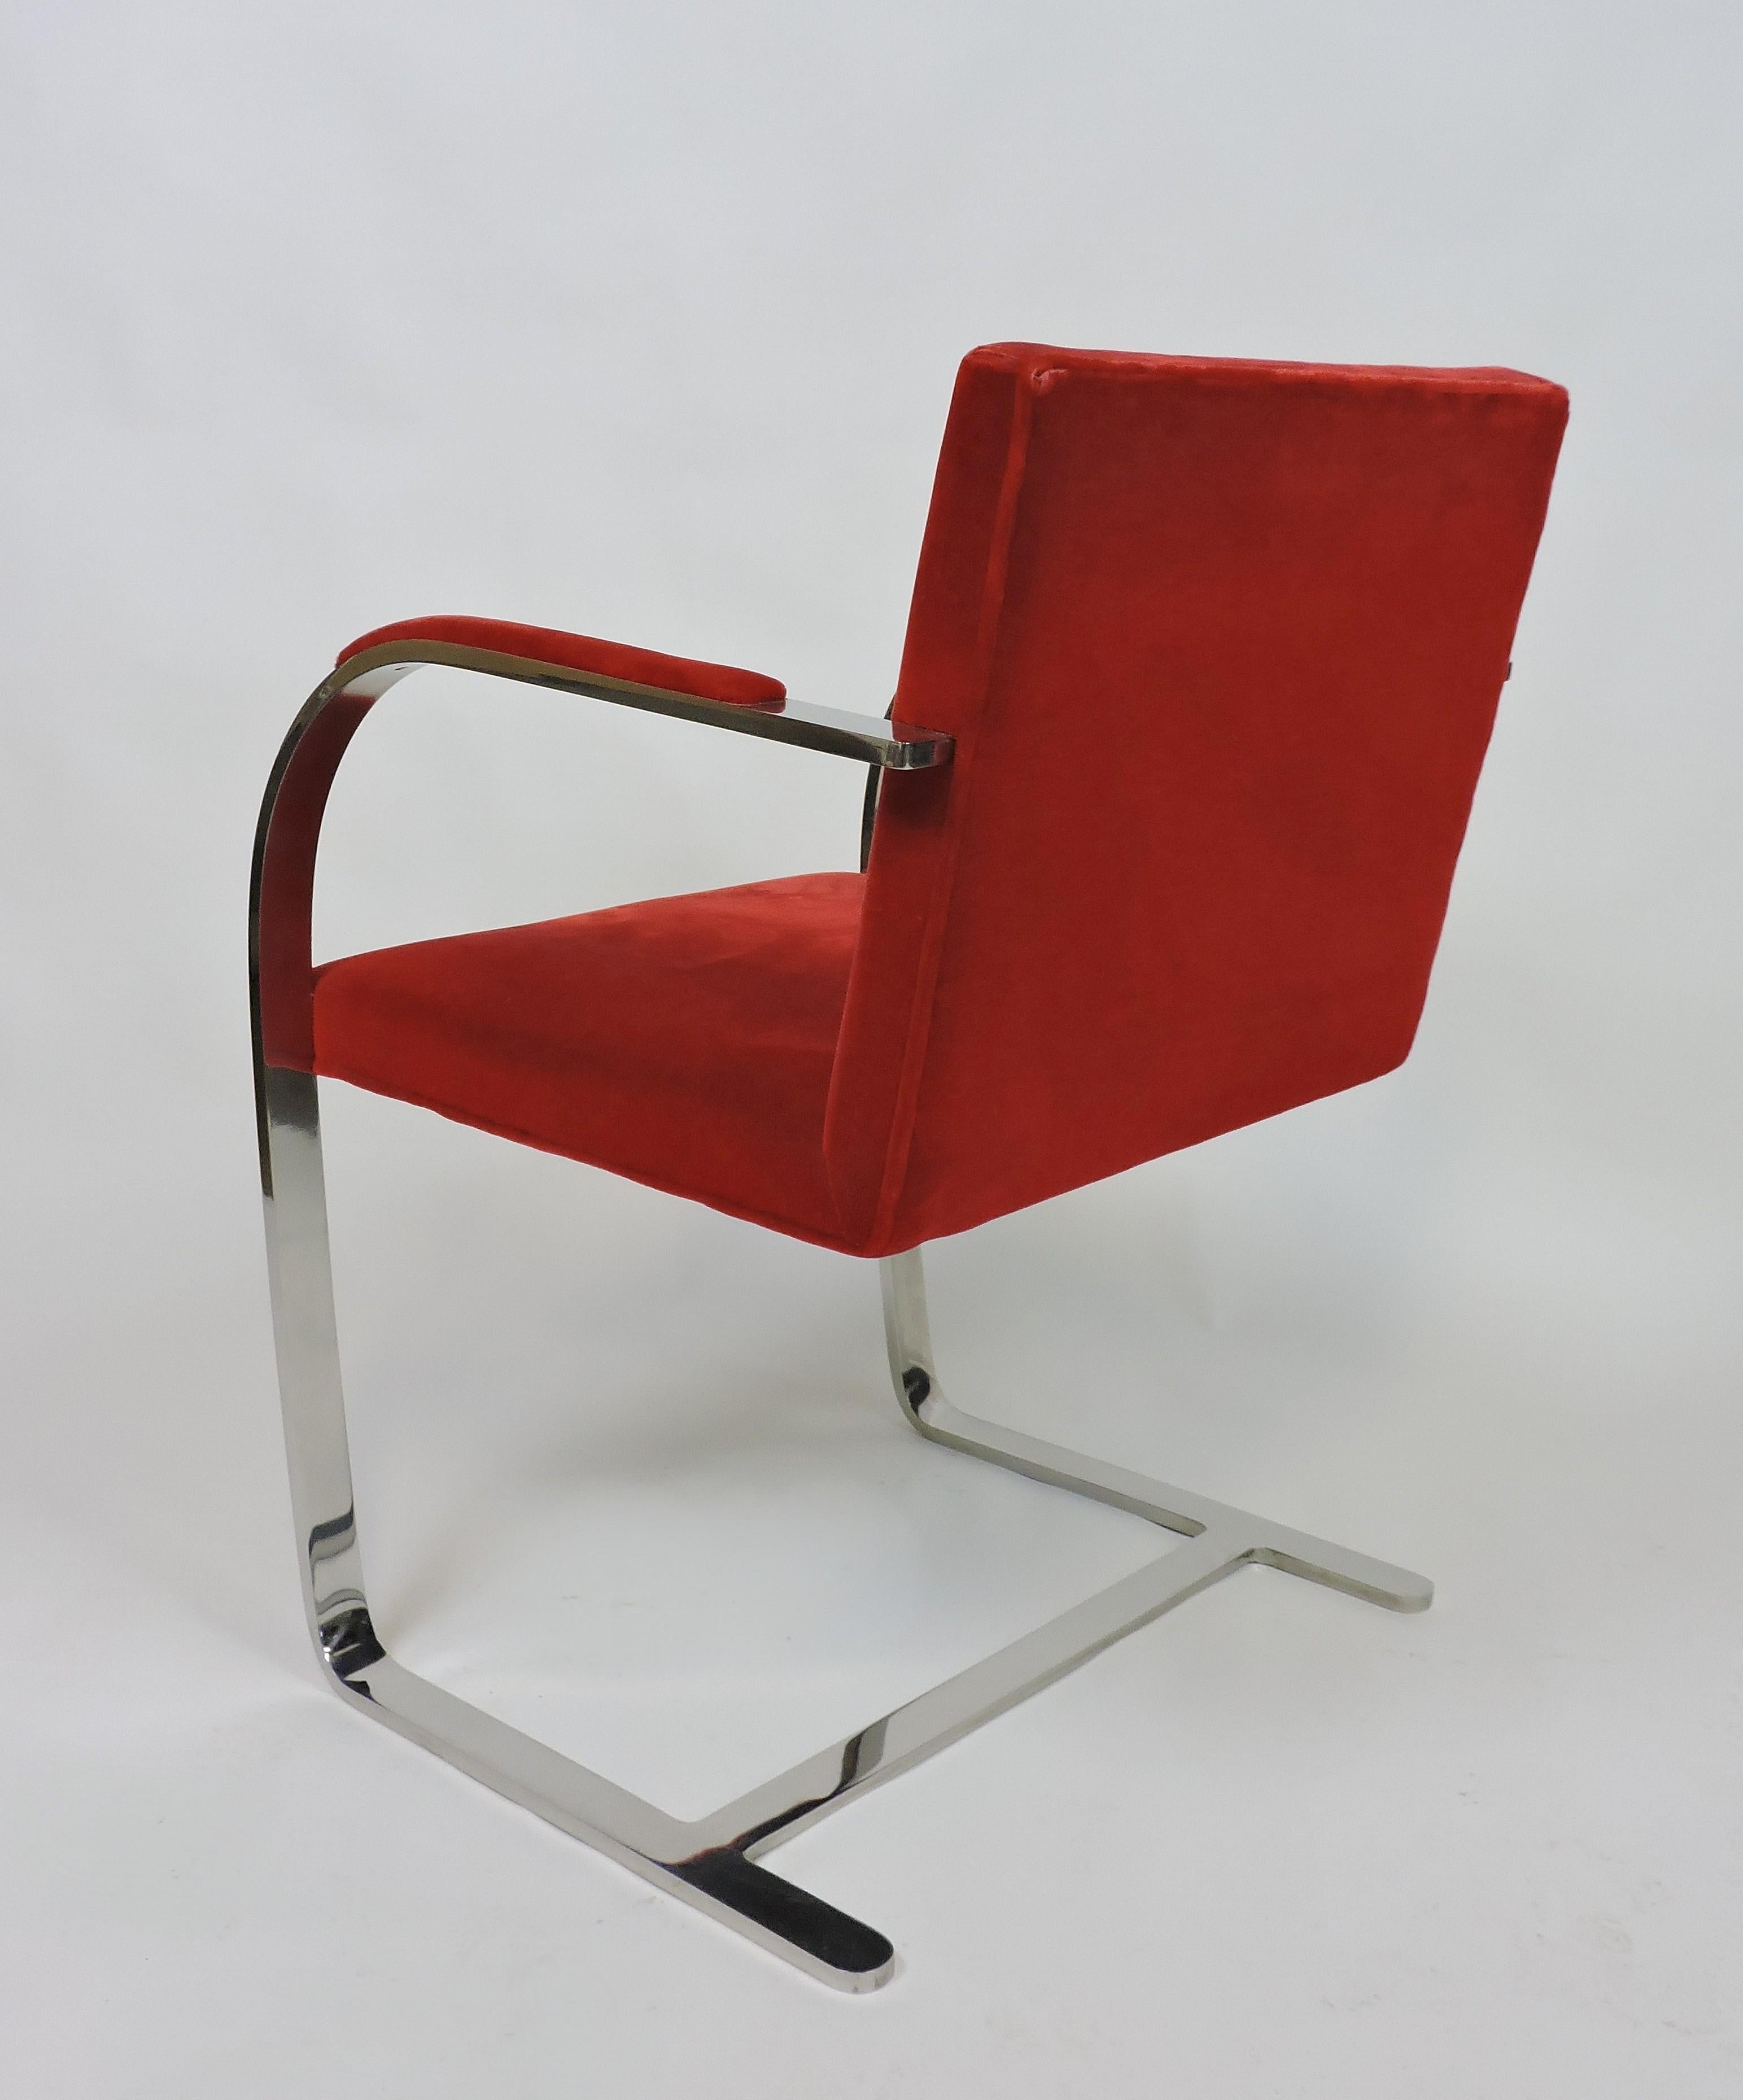 American Mies van der Rohe for Knoll Brno Flat Bar Stainless Steel Chair